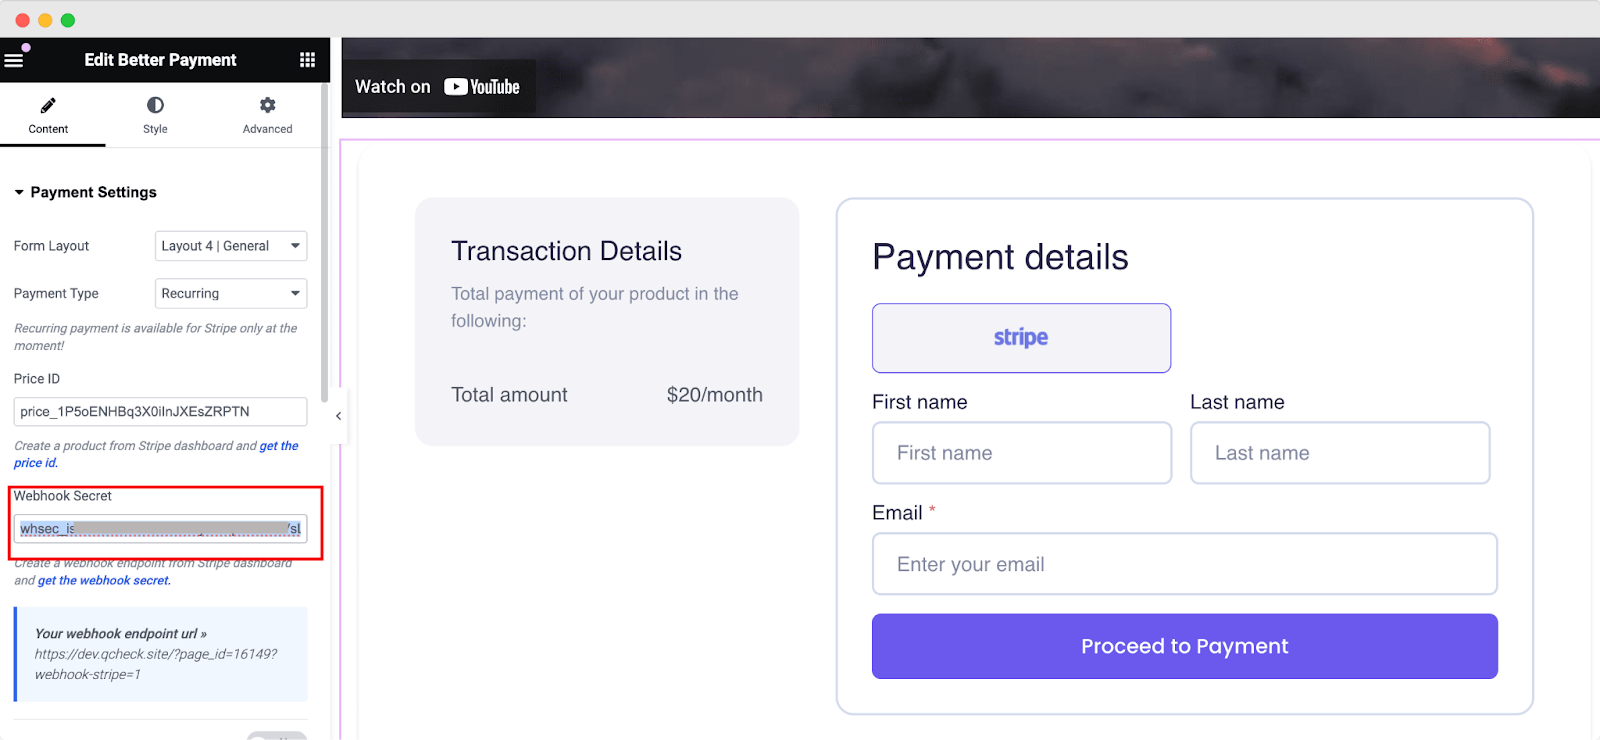 Add Webhook Endpoint For Recurring Payments